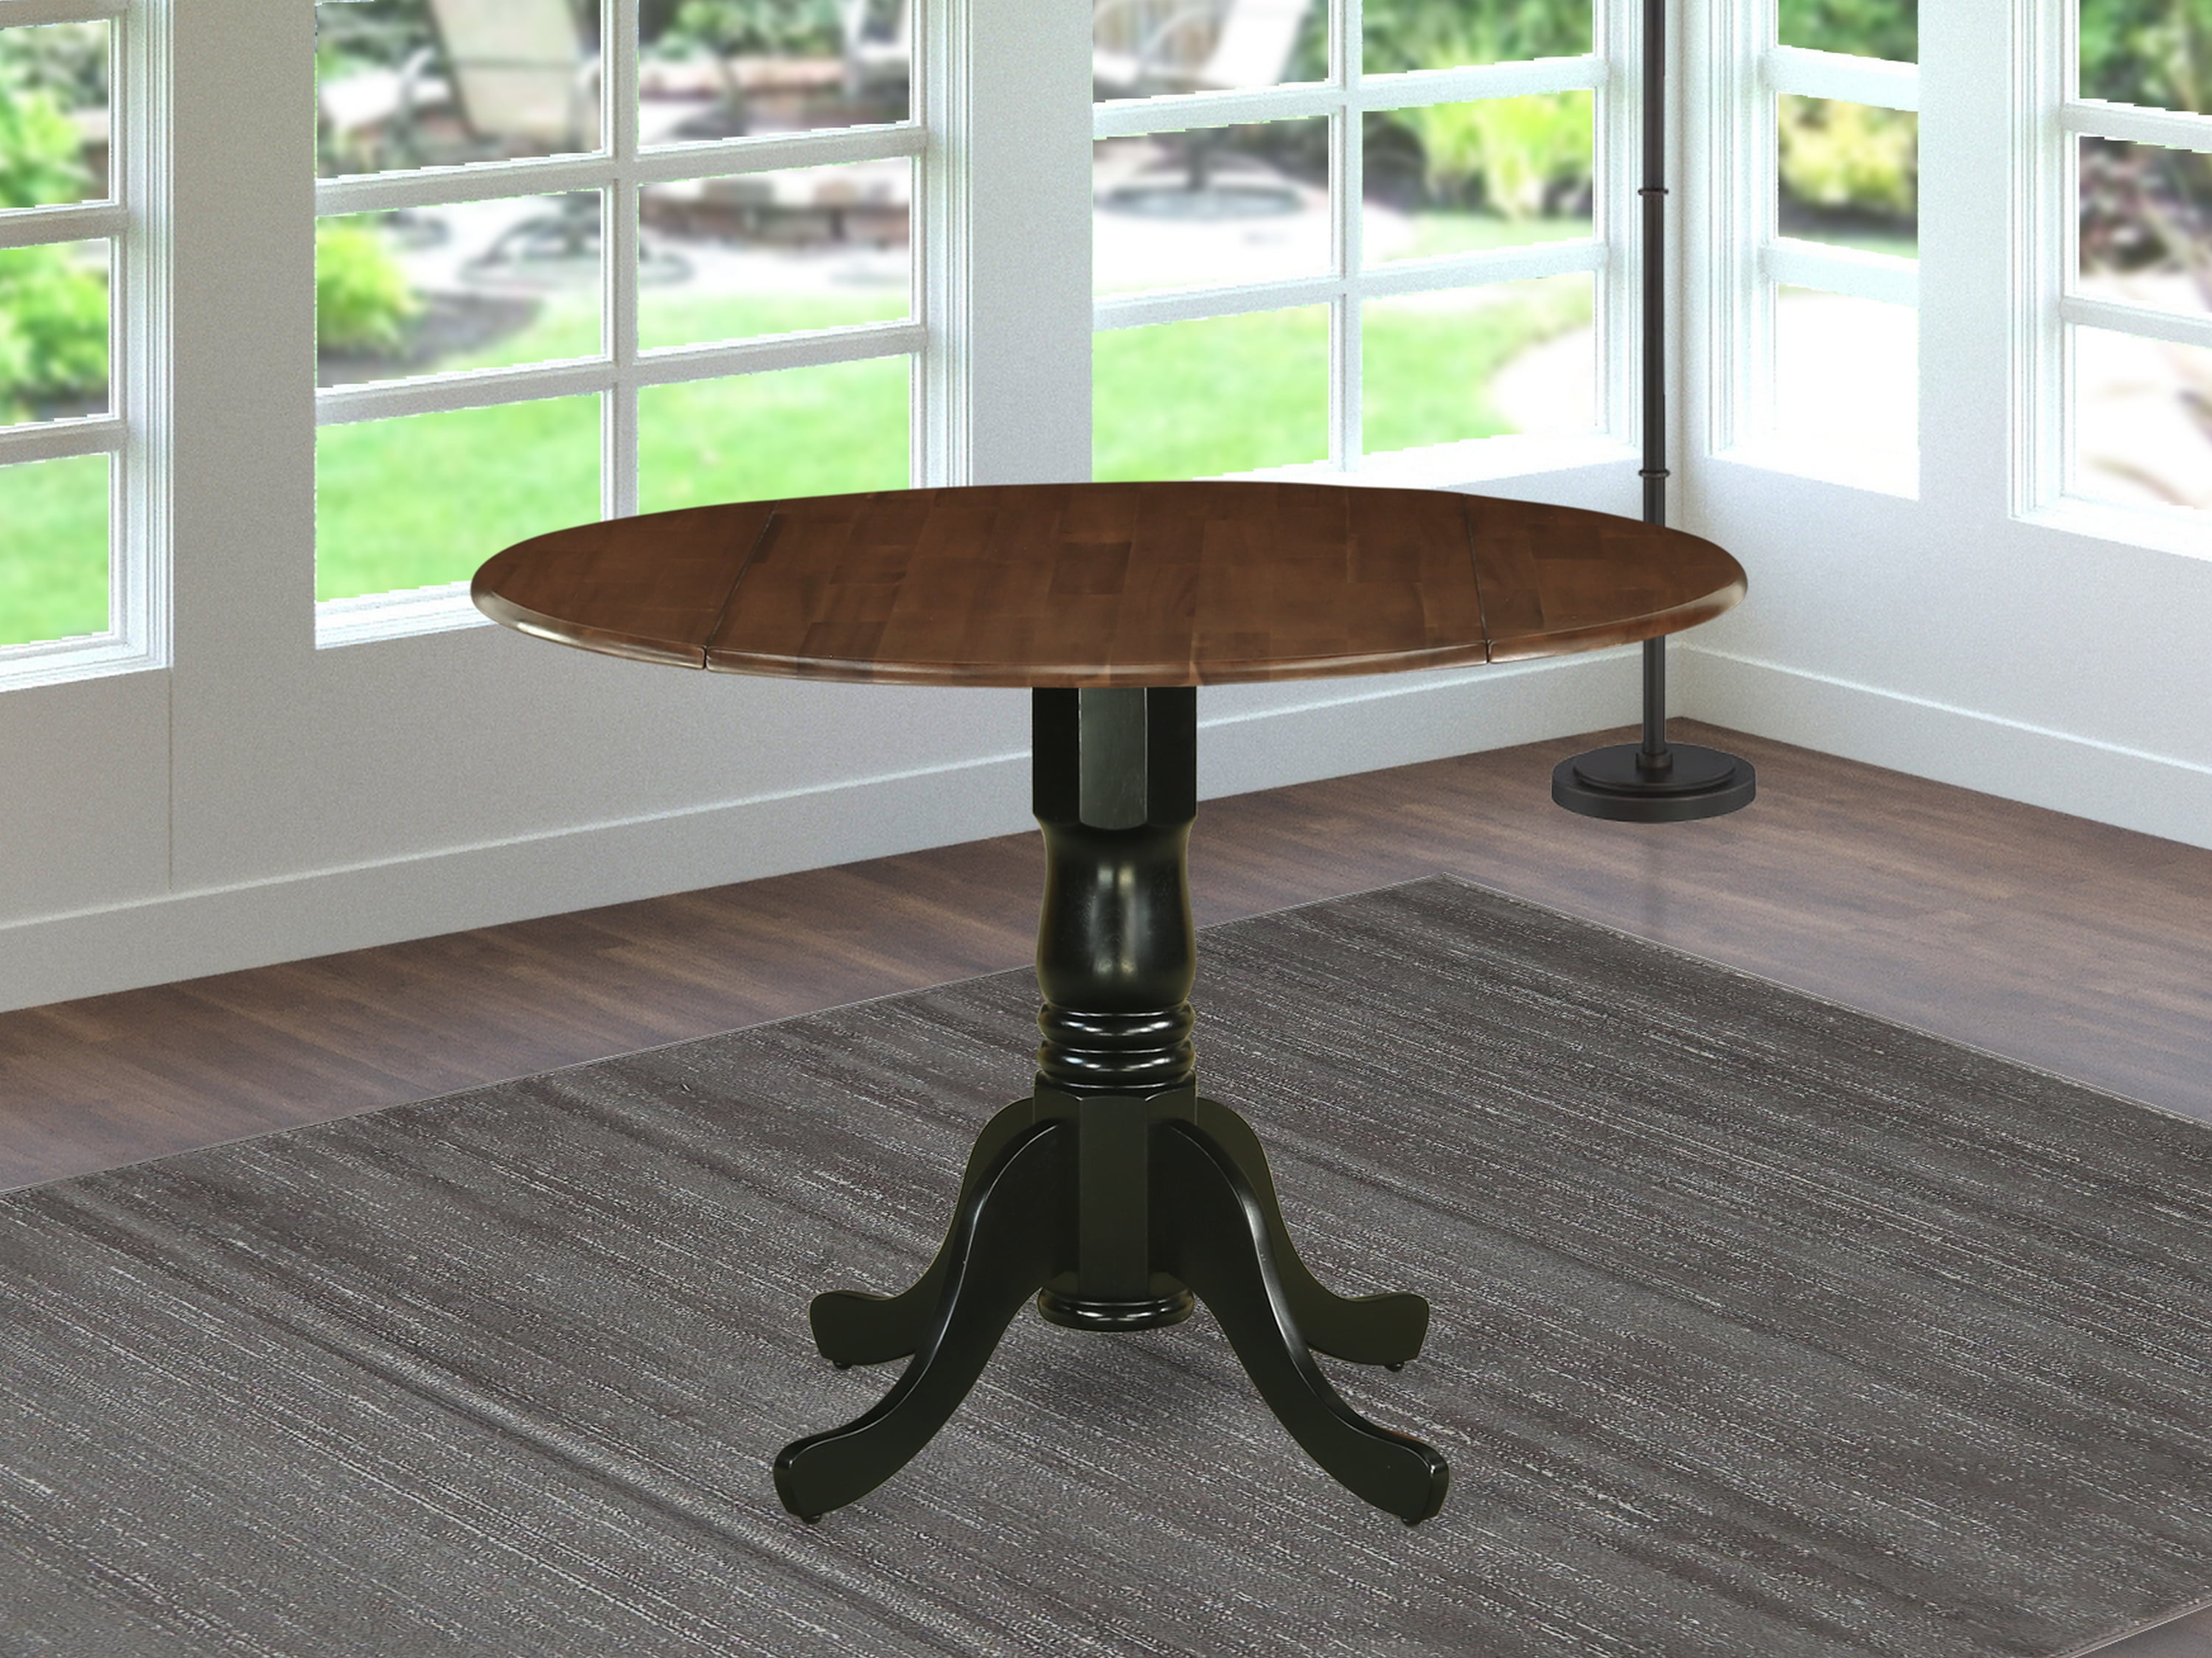 Dmt Wbk Tp Dublin Dining Table Made Of, 42 Inch Round Dining Tables